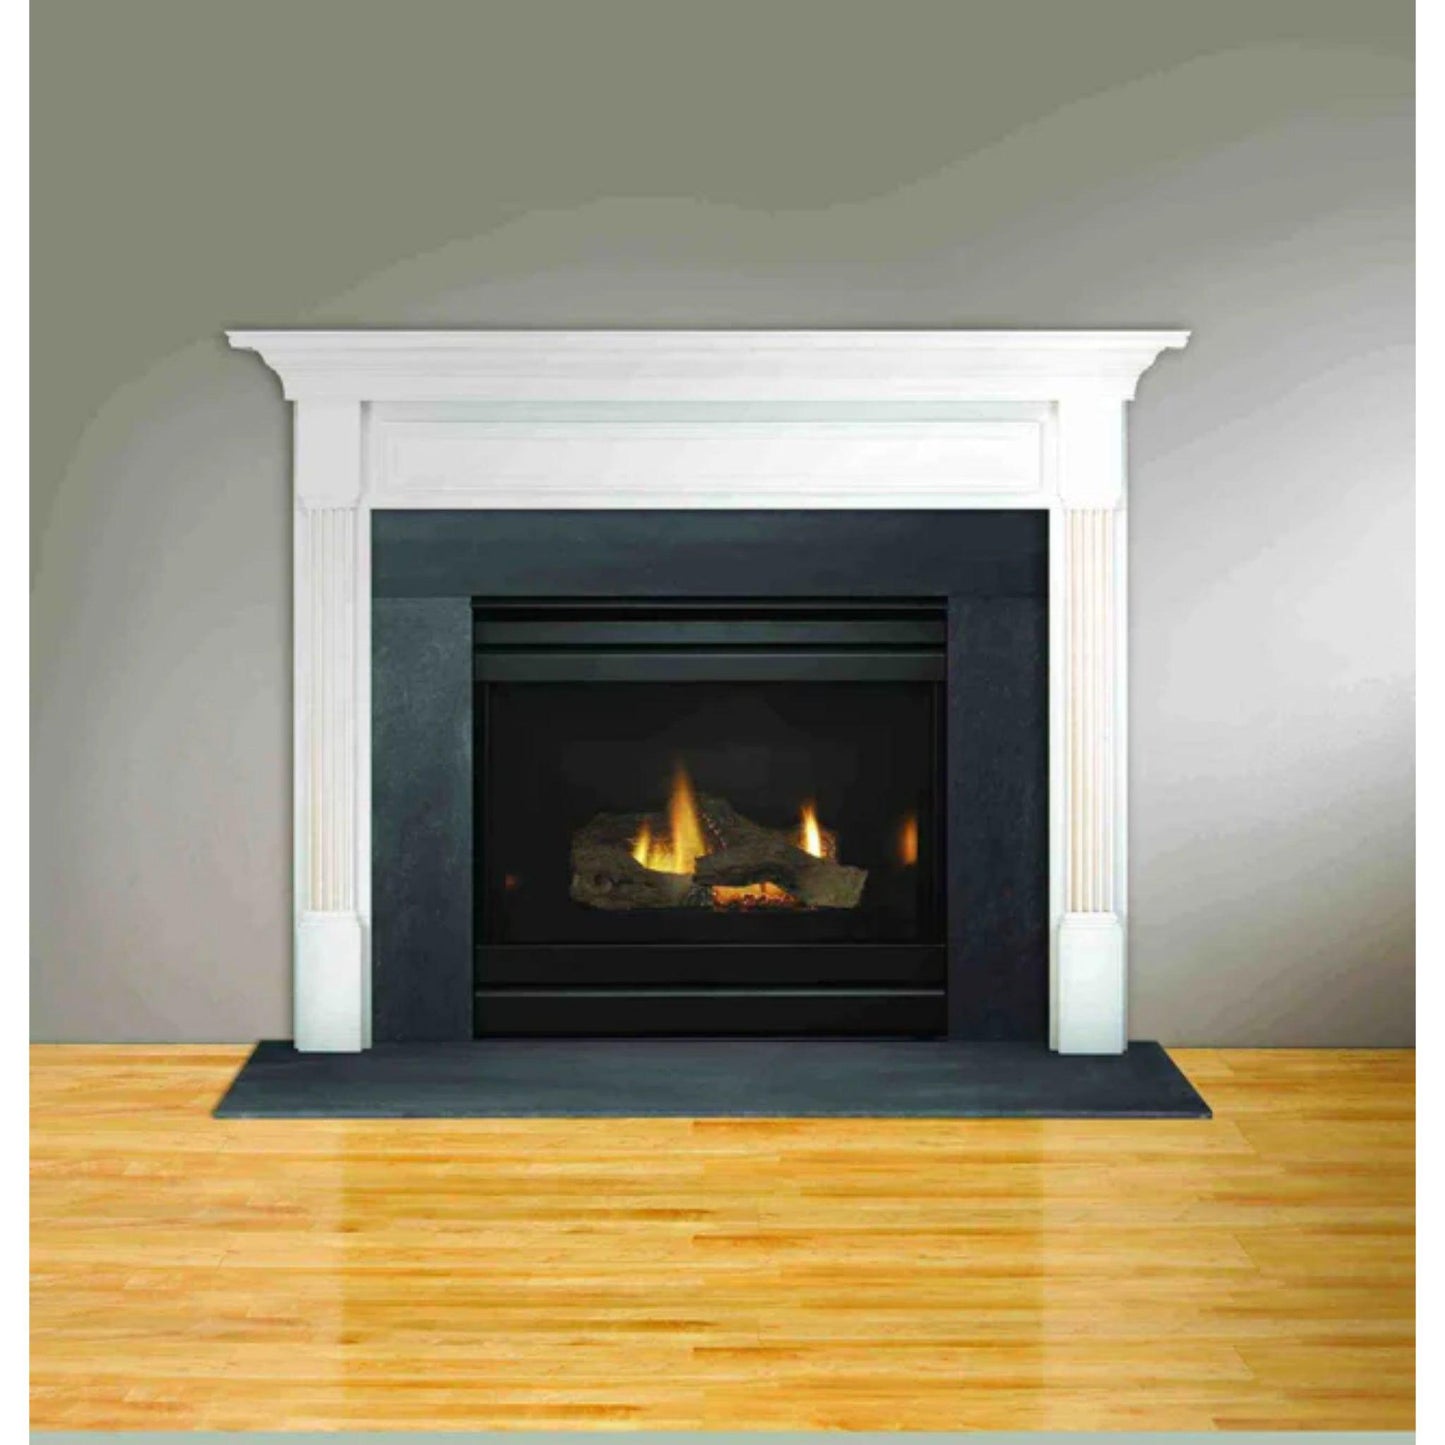 Majestic DV3732 27" Traditional Top/Rear Direct Vent Natural Gas Fireplace With IntelliFire Ignition System